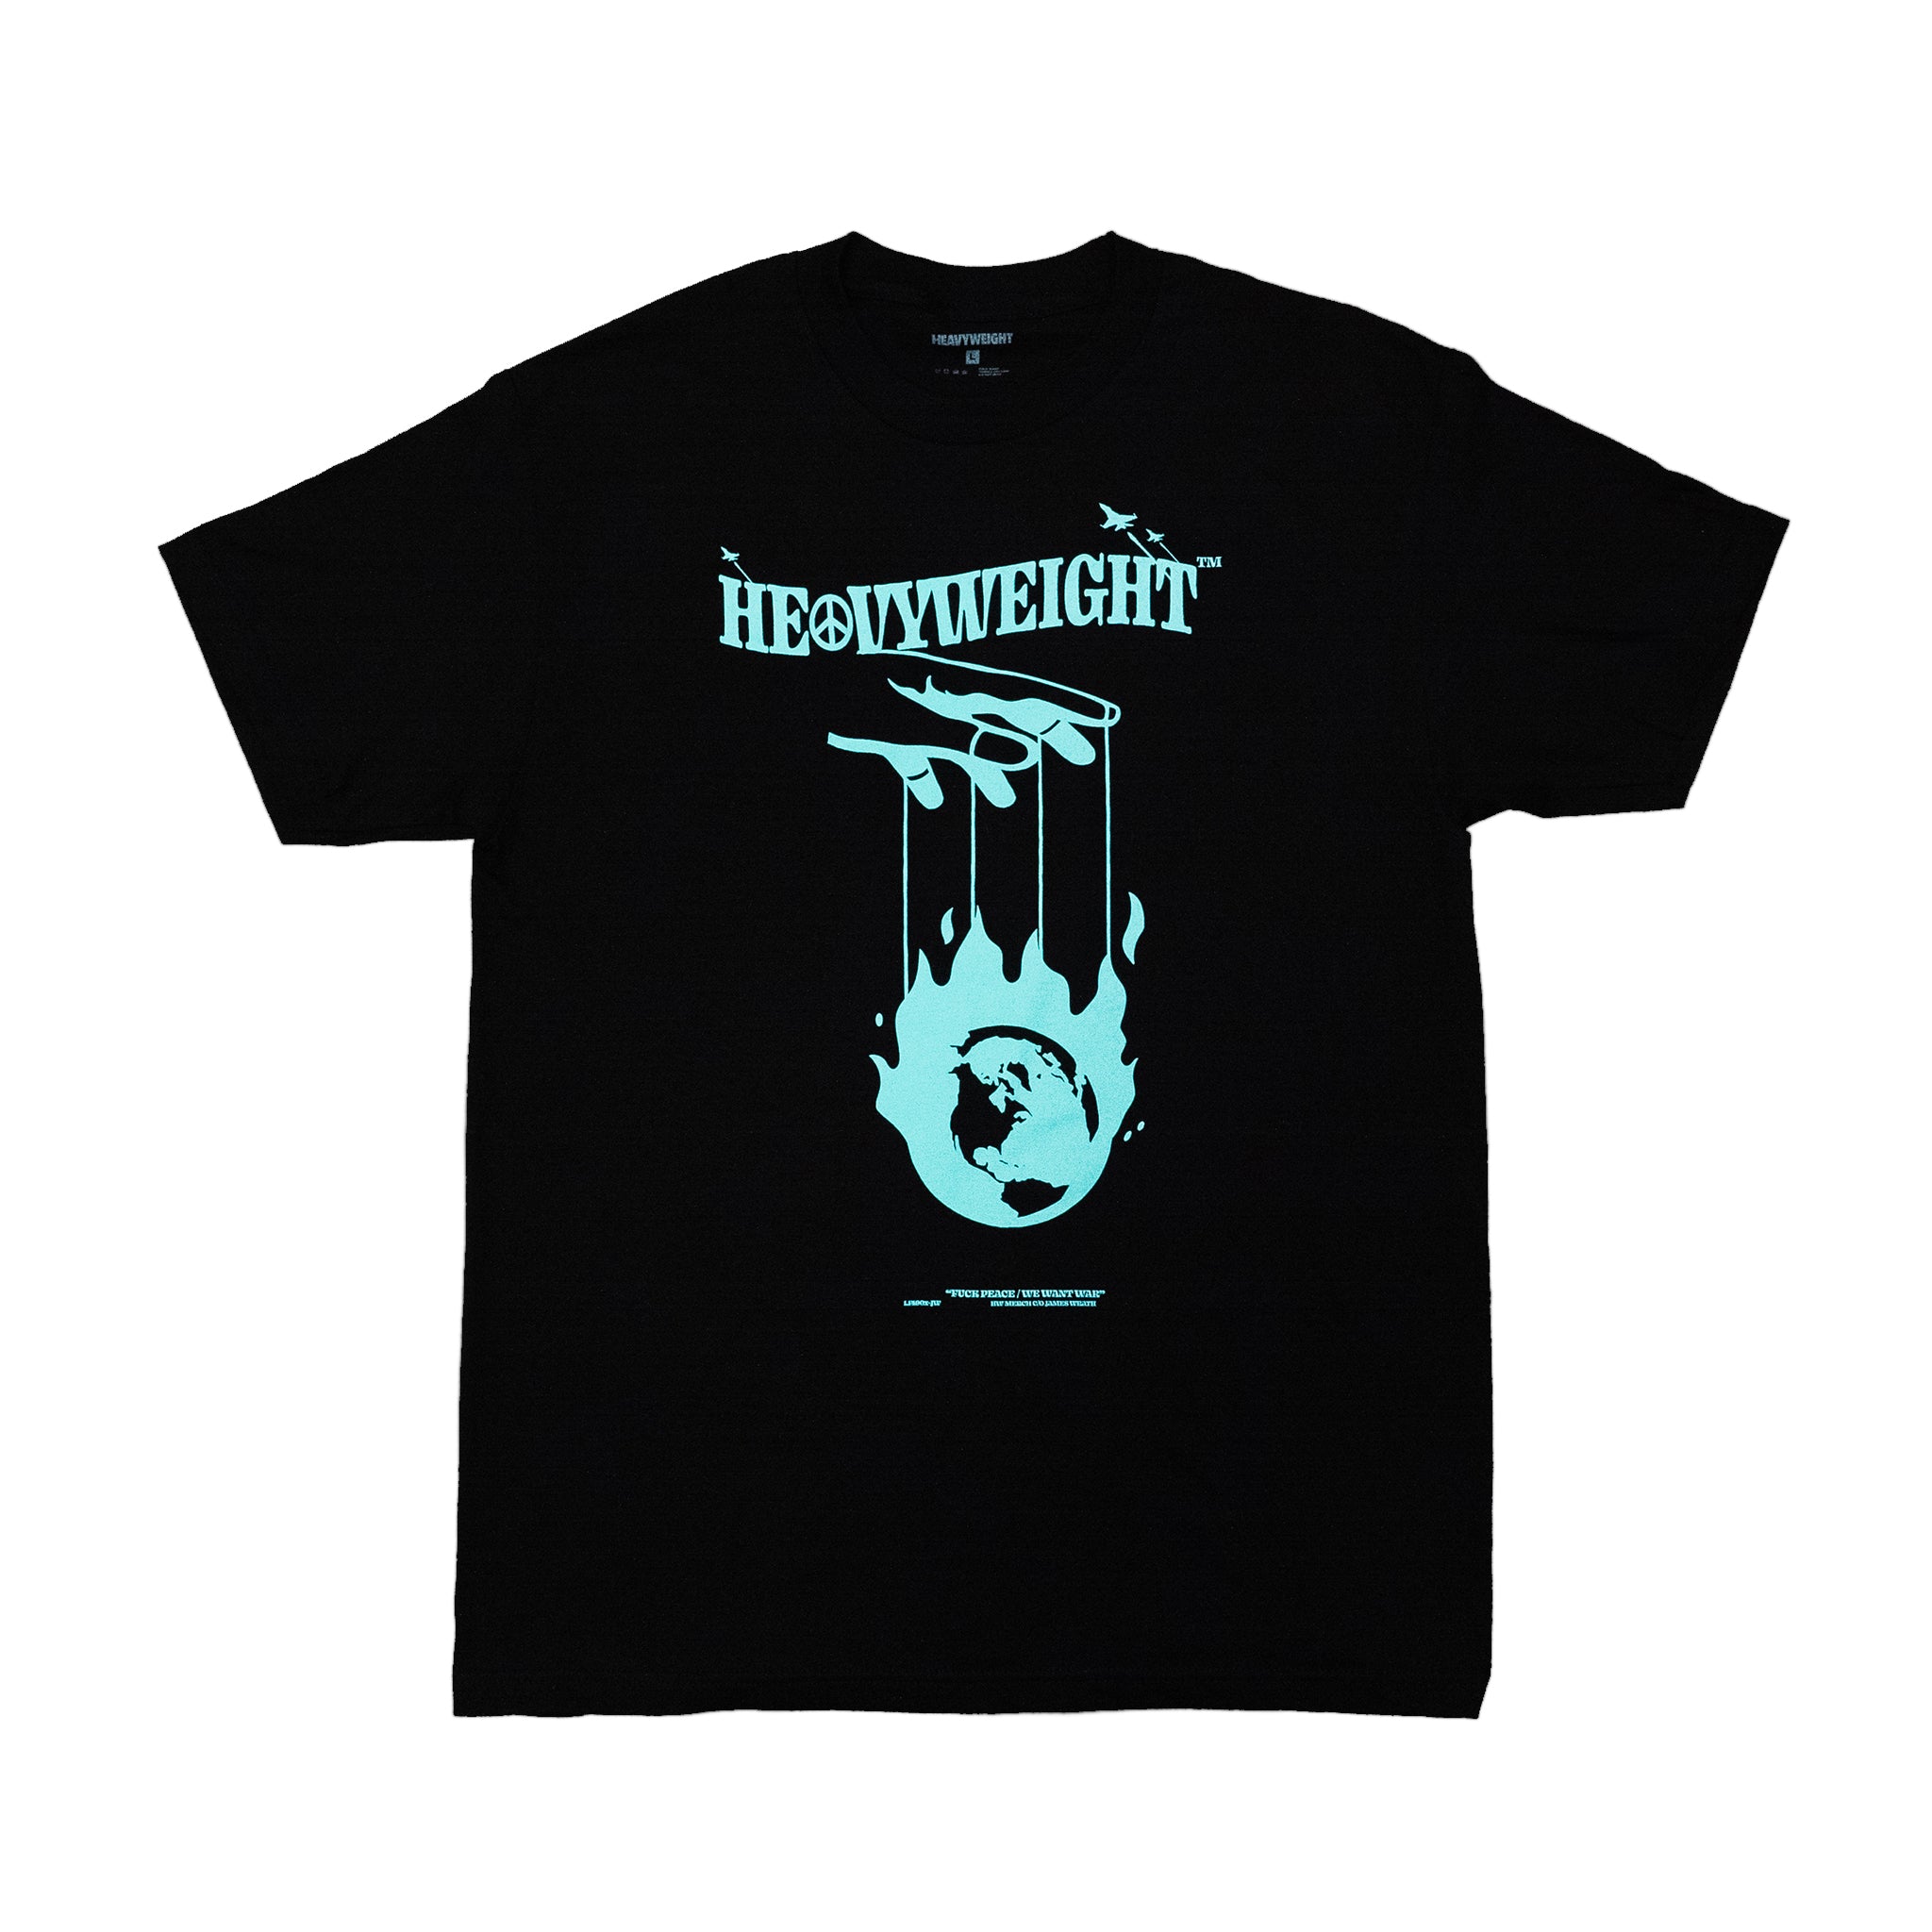 Heavyweight Records - World is Yours Shirt